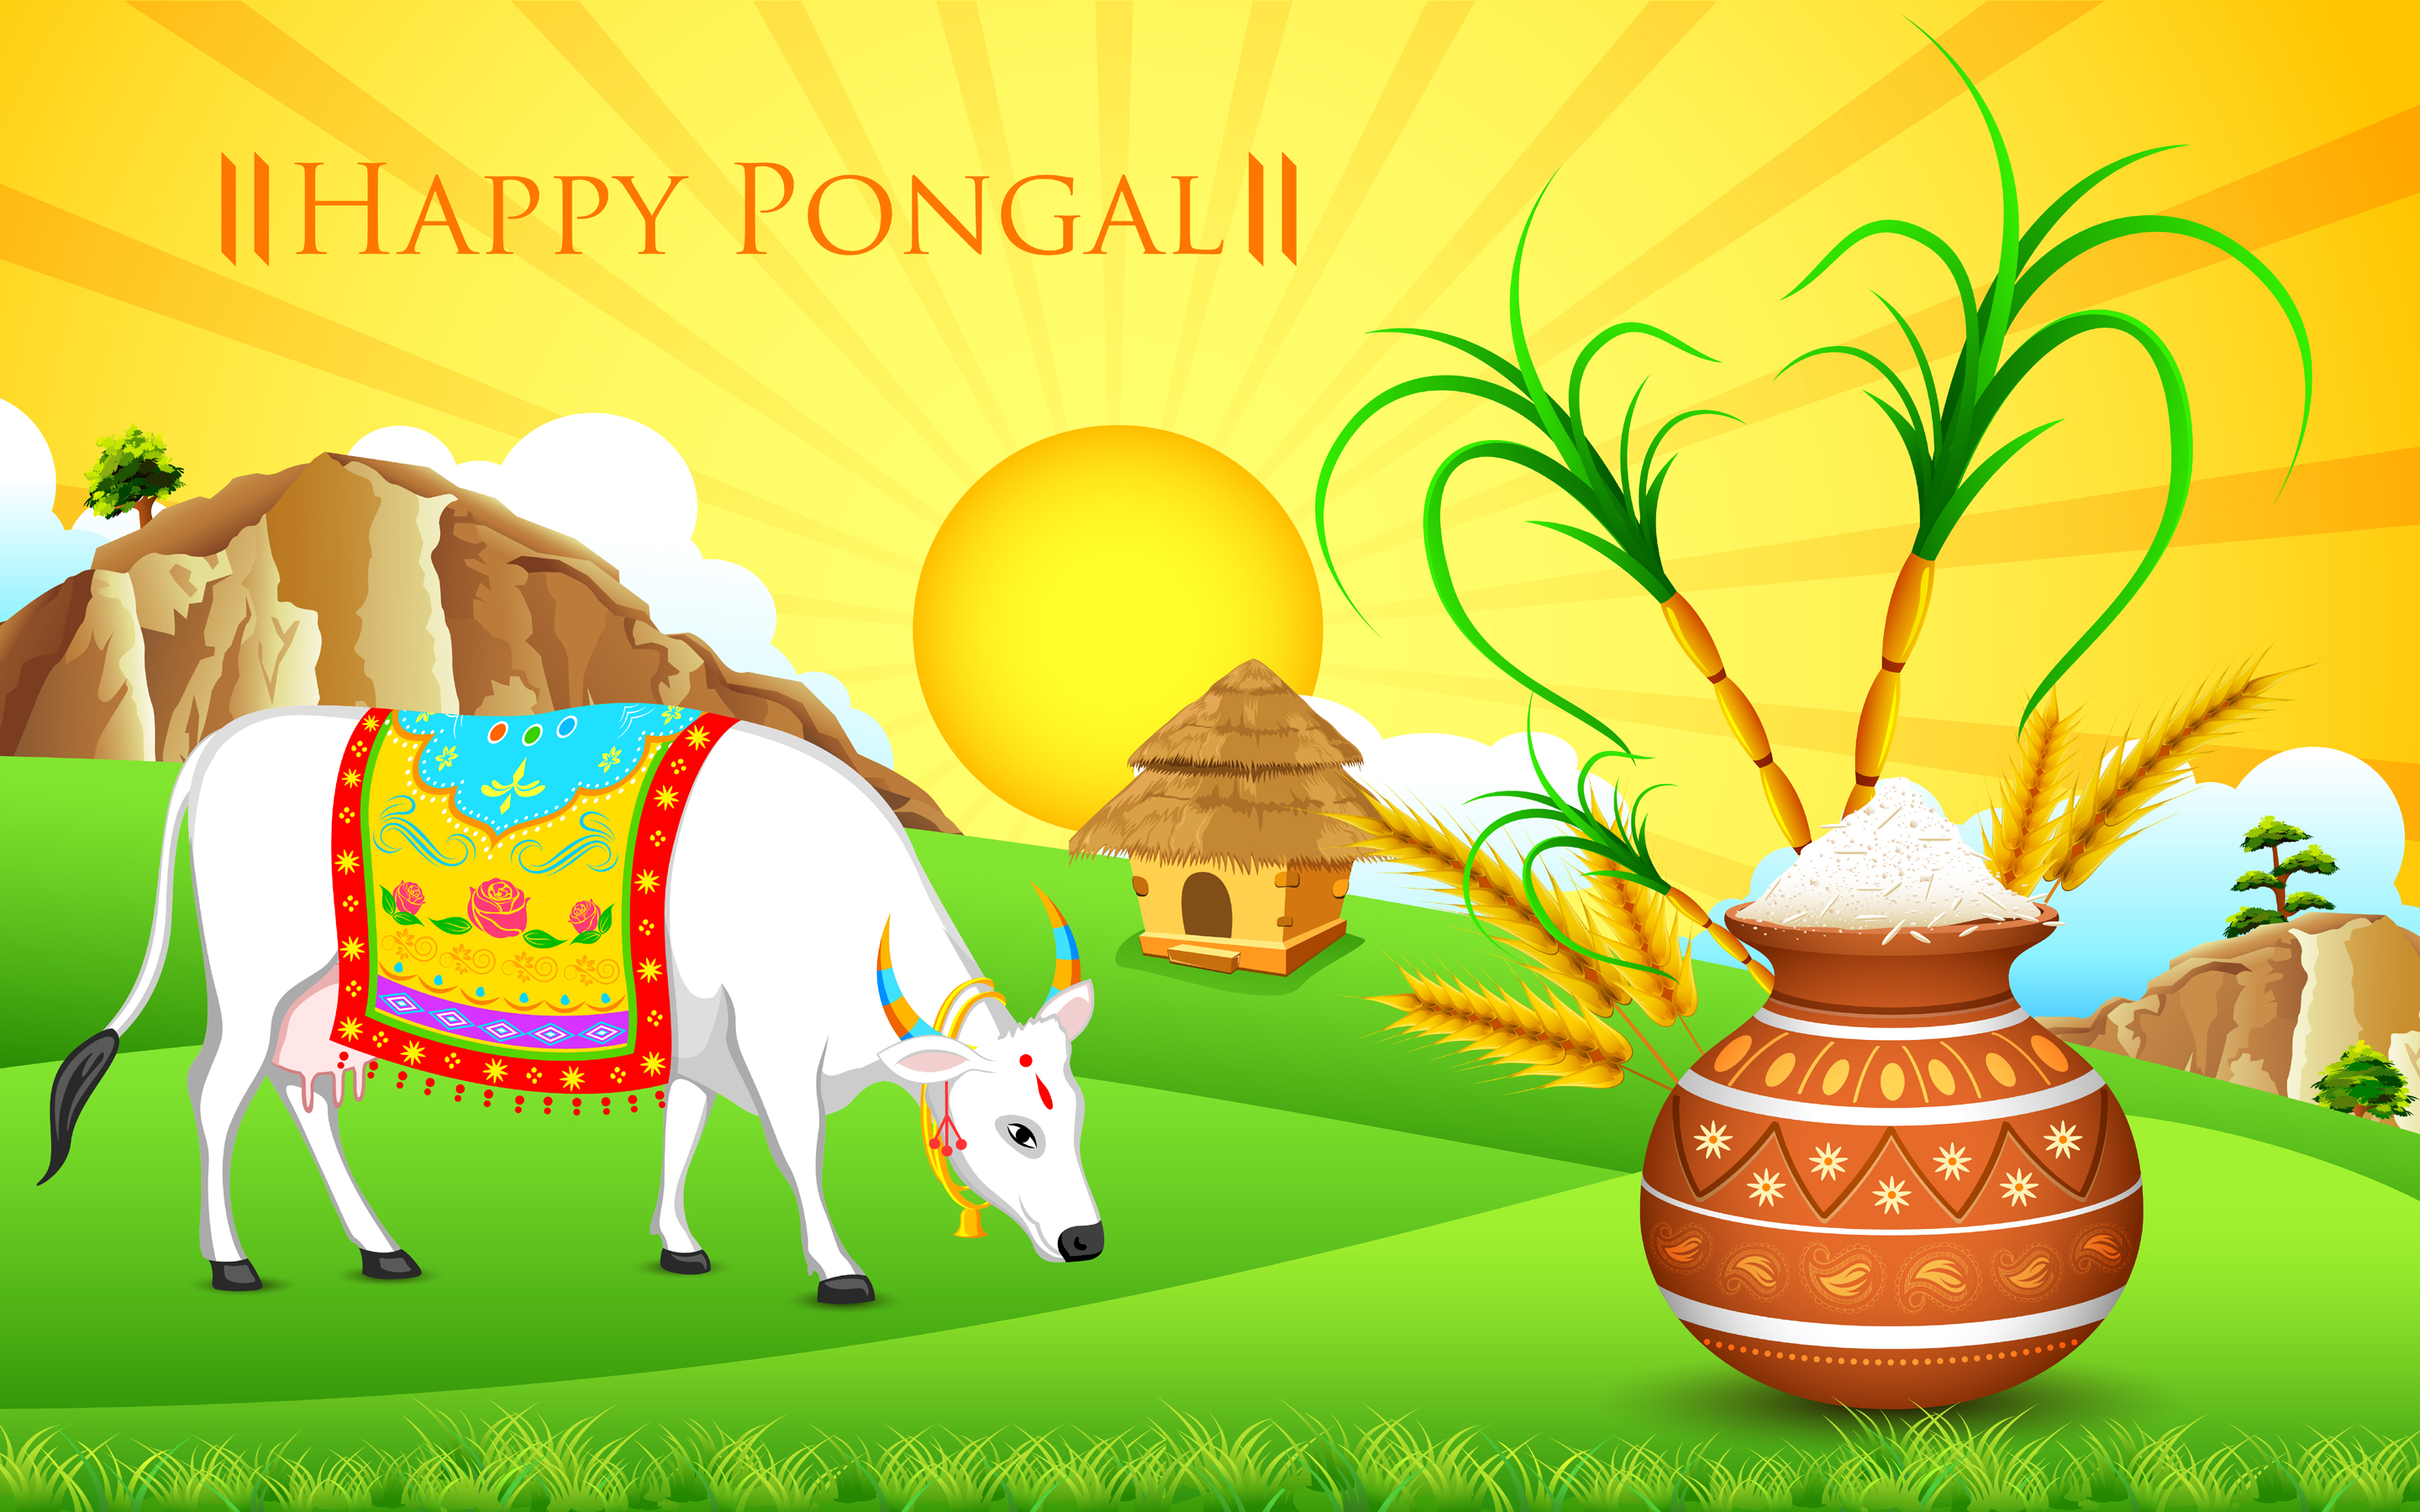 Pongal HD Wallpaper Image Greetings Pictures And Photos